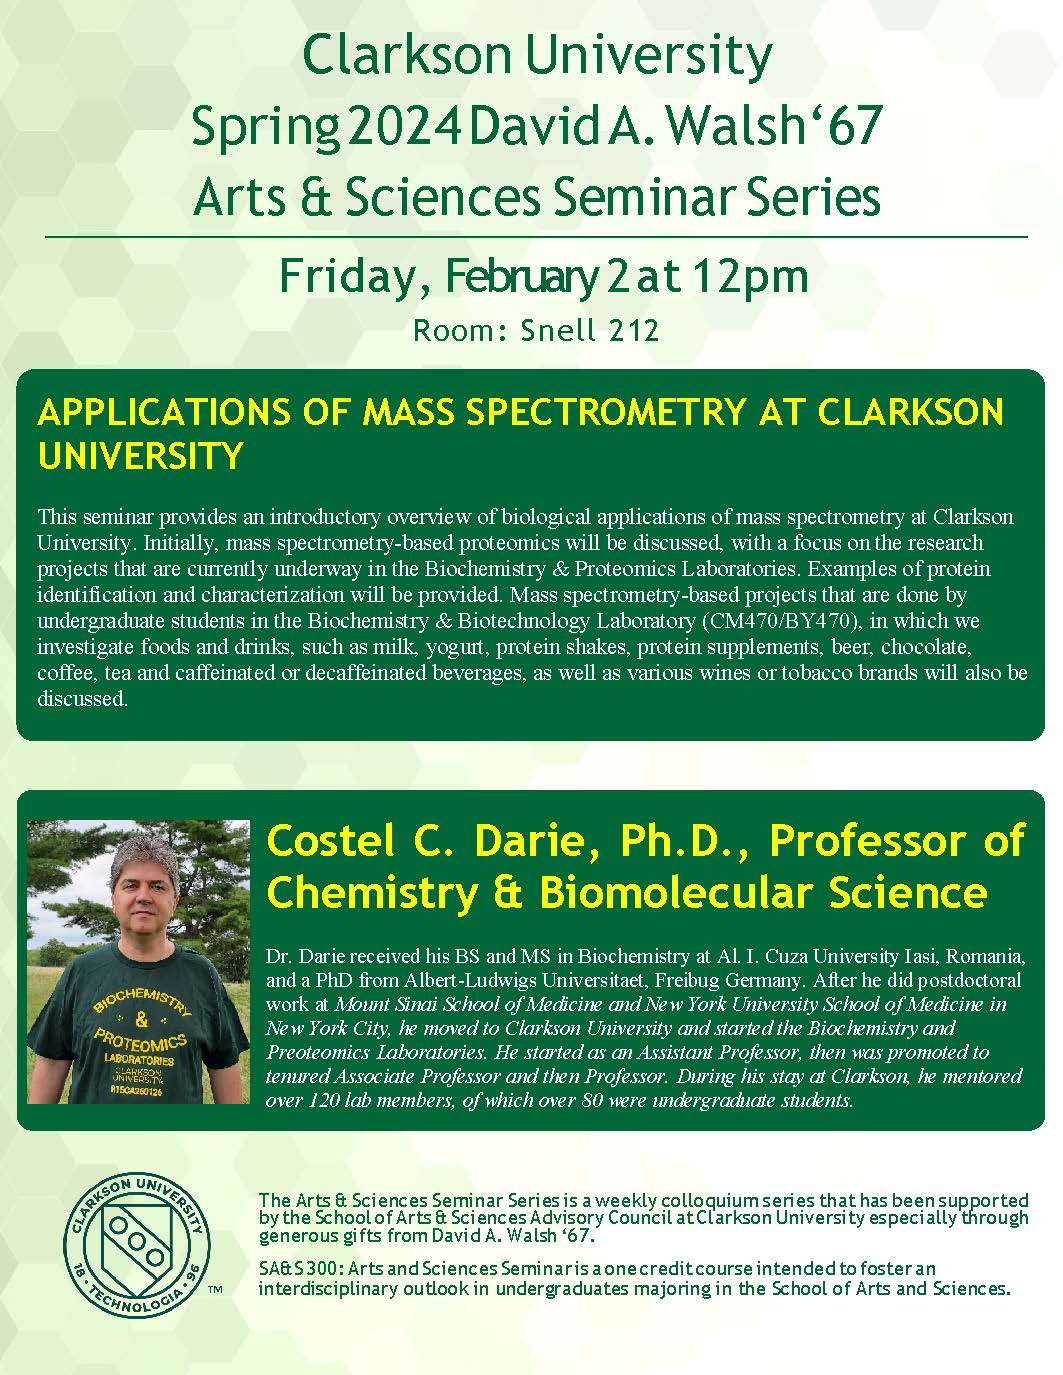 Spring 2024 David A. Walsh ‘67 Arts & Sciences Seminar Series Friday, February 2, at 12 p.m. in Snell 212